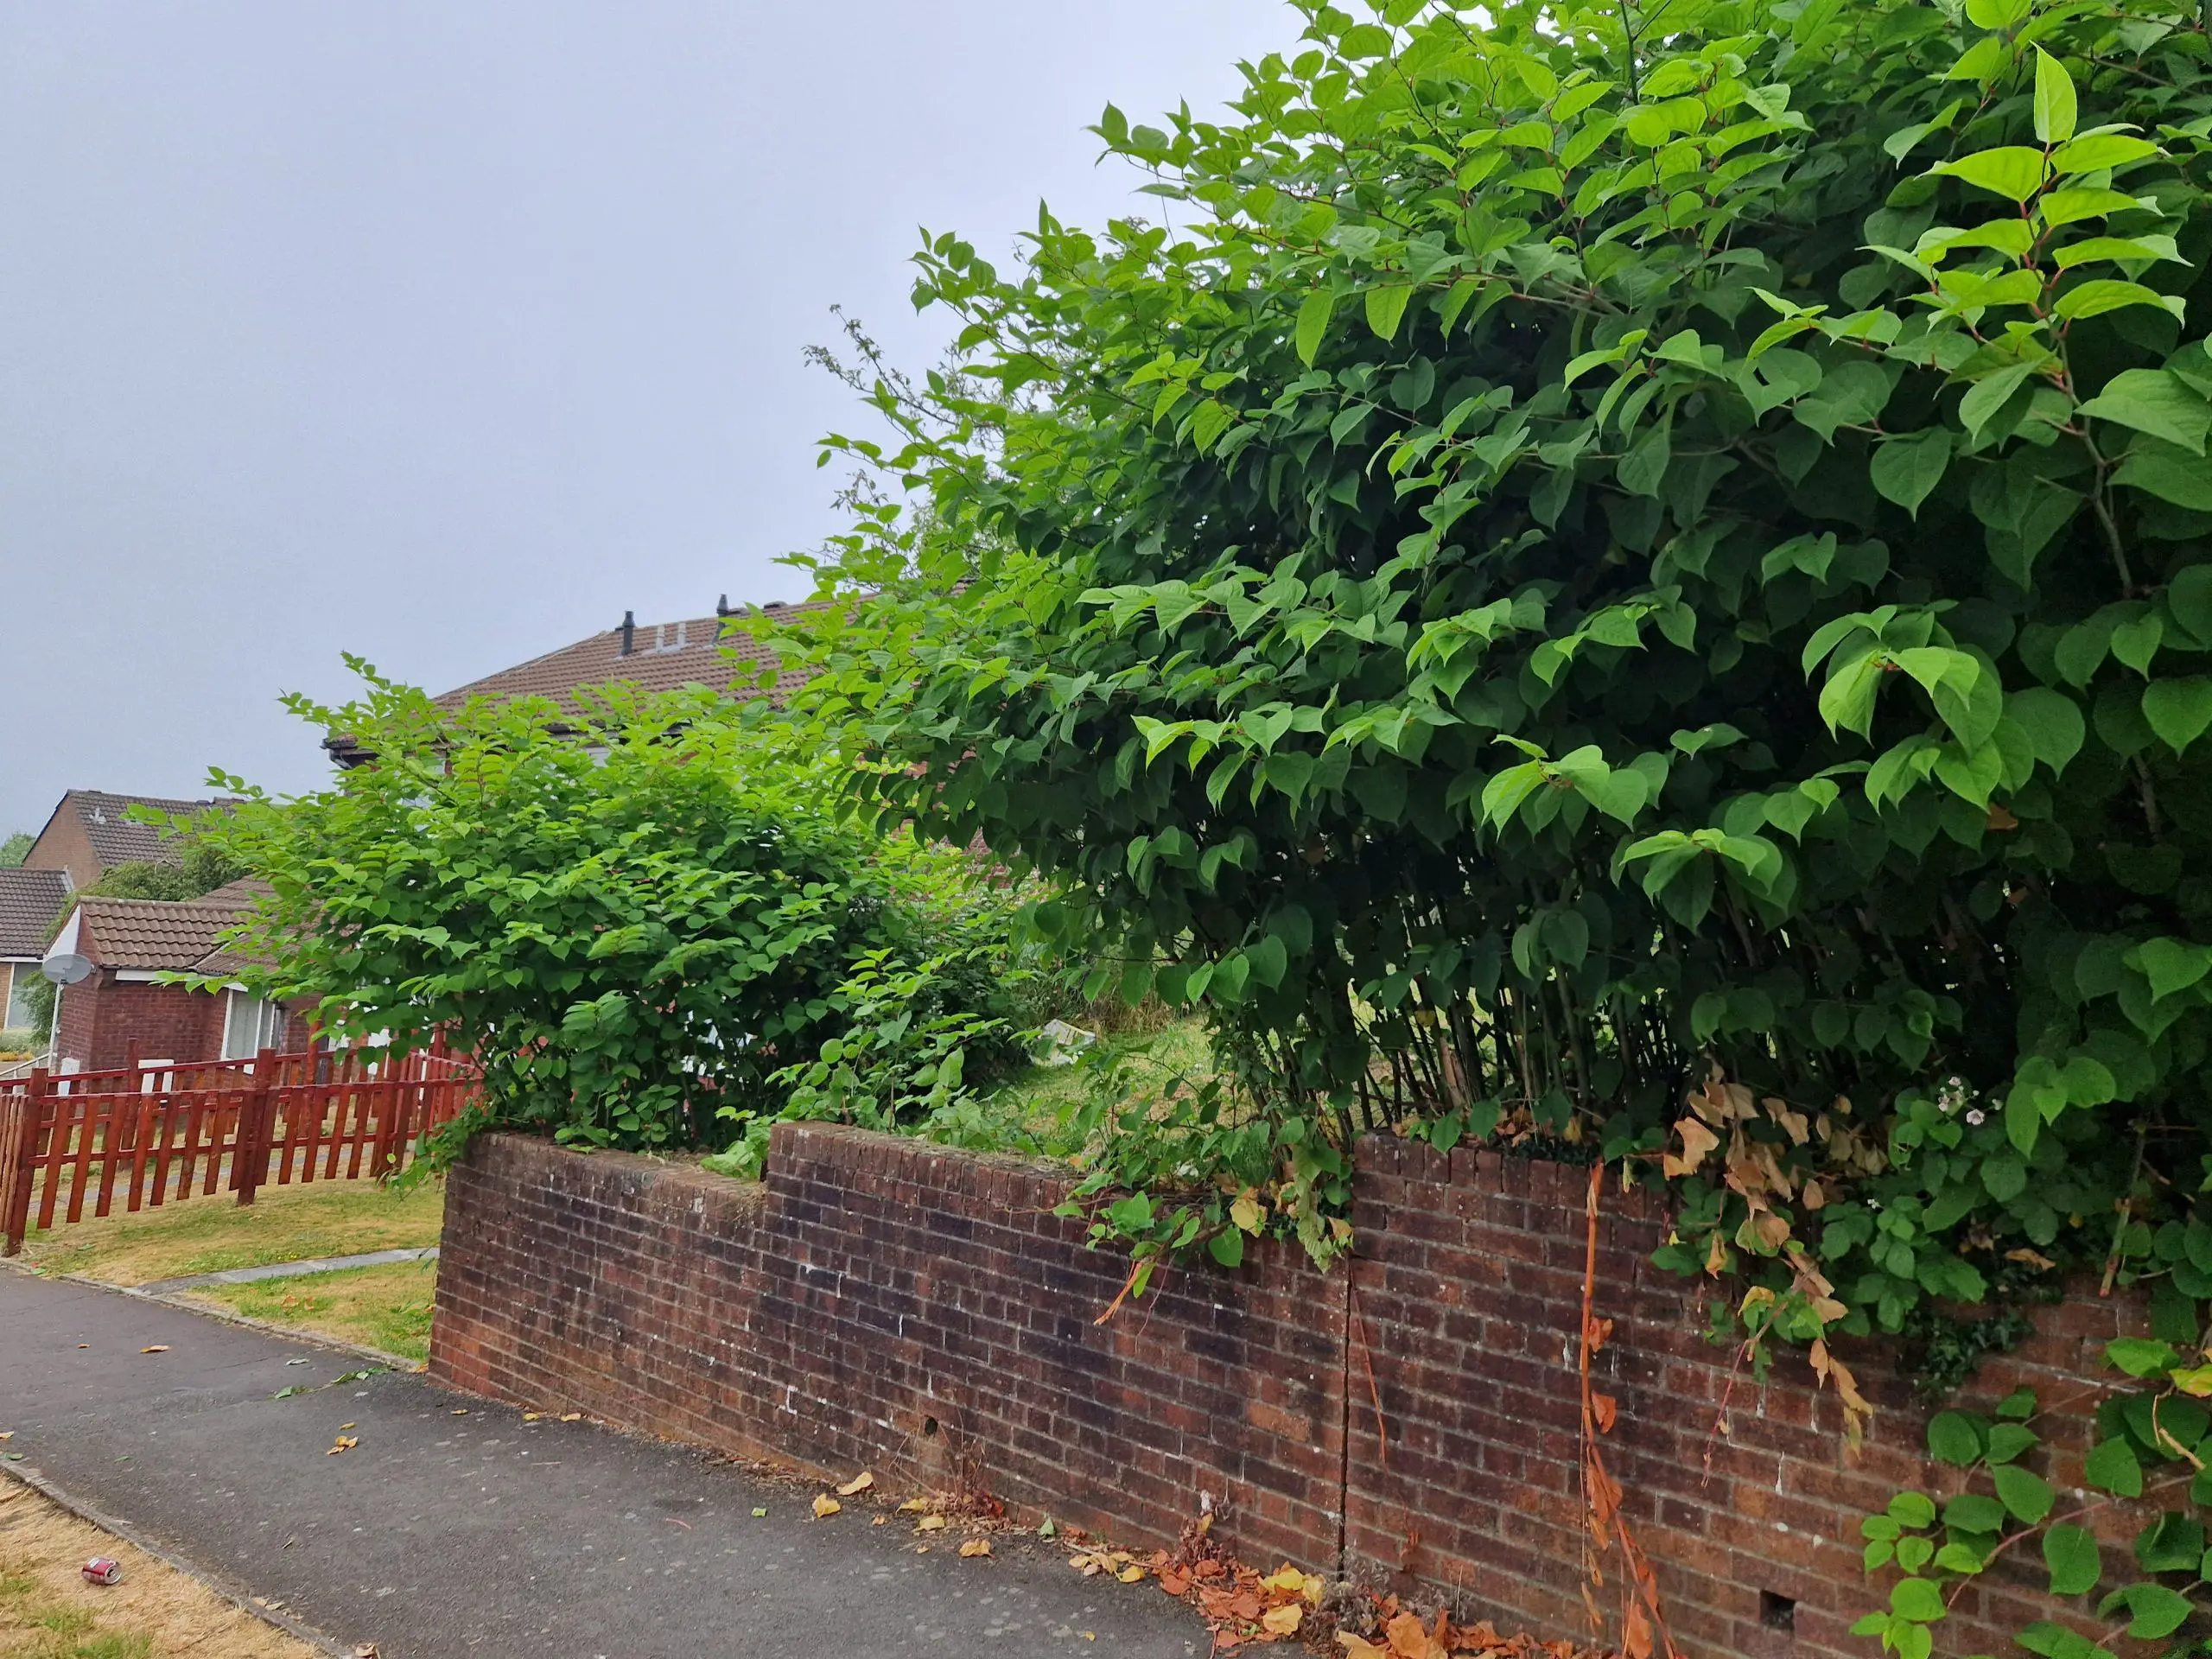 Growth of Japanese knotweed near properties which requires a treatment plan